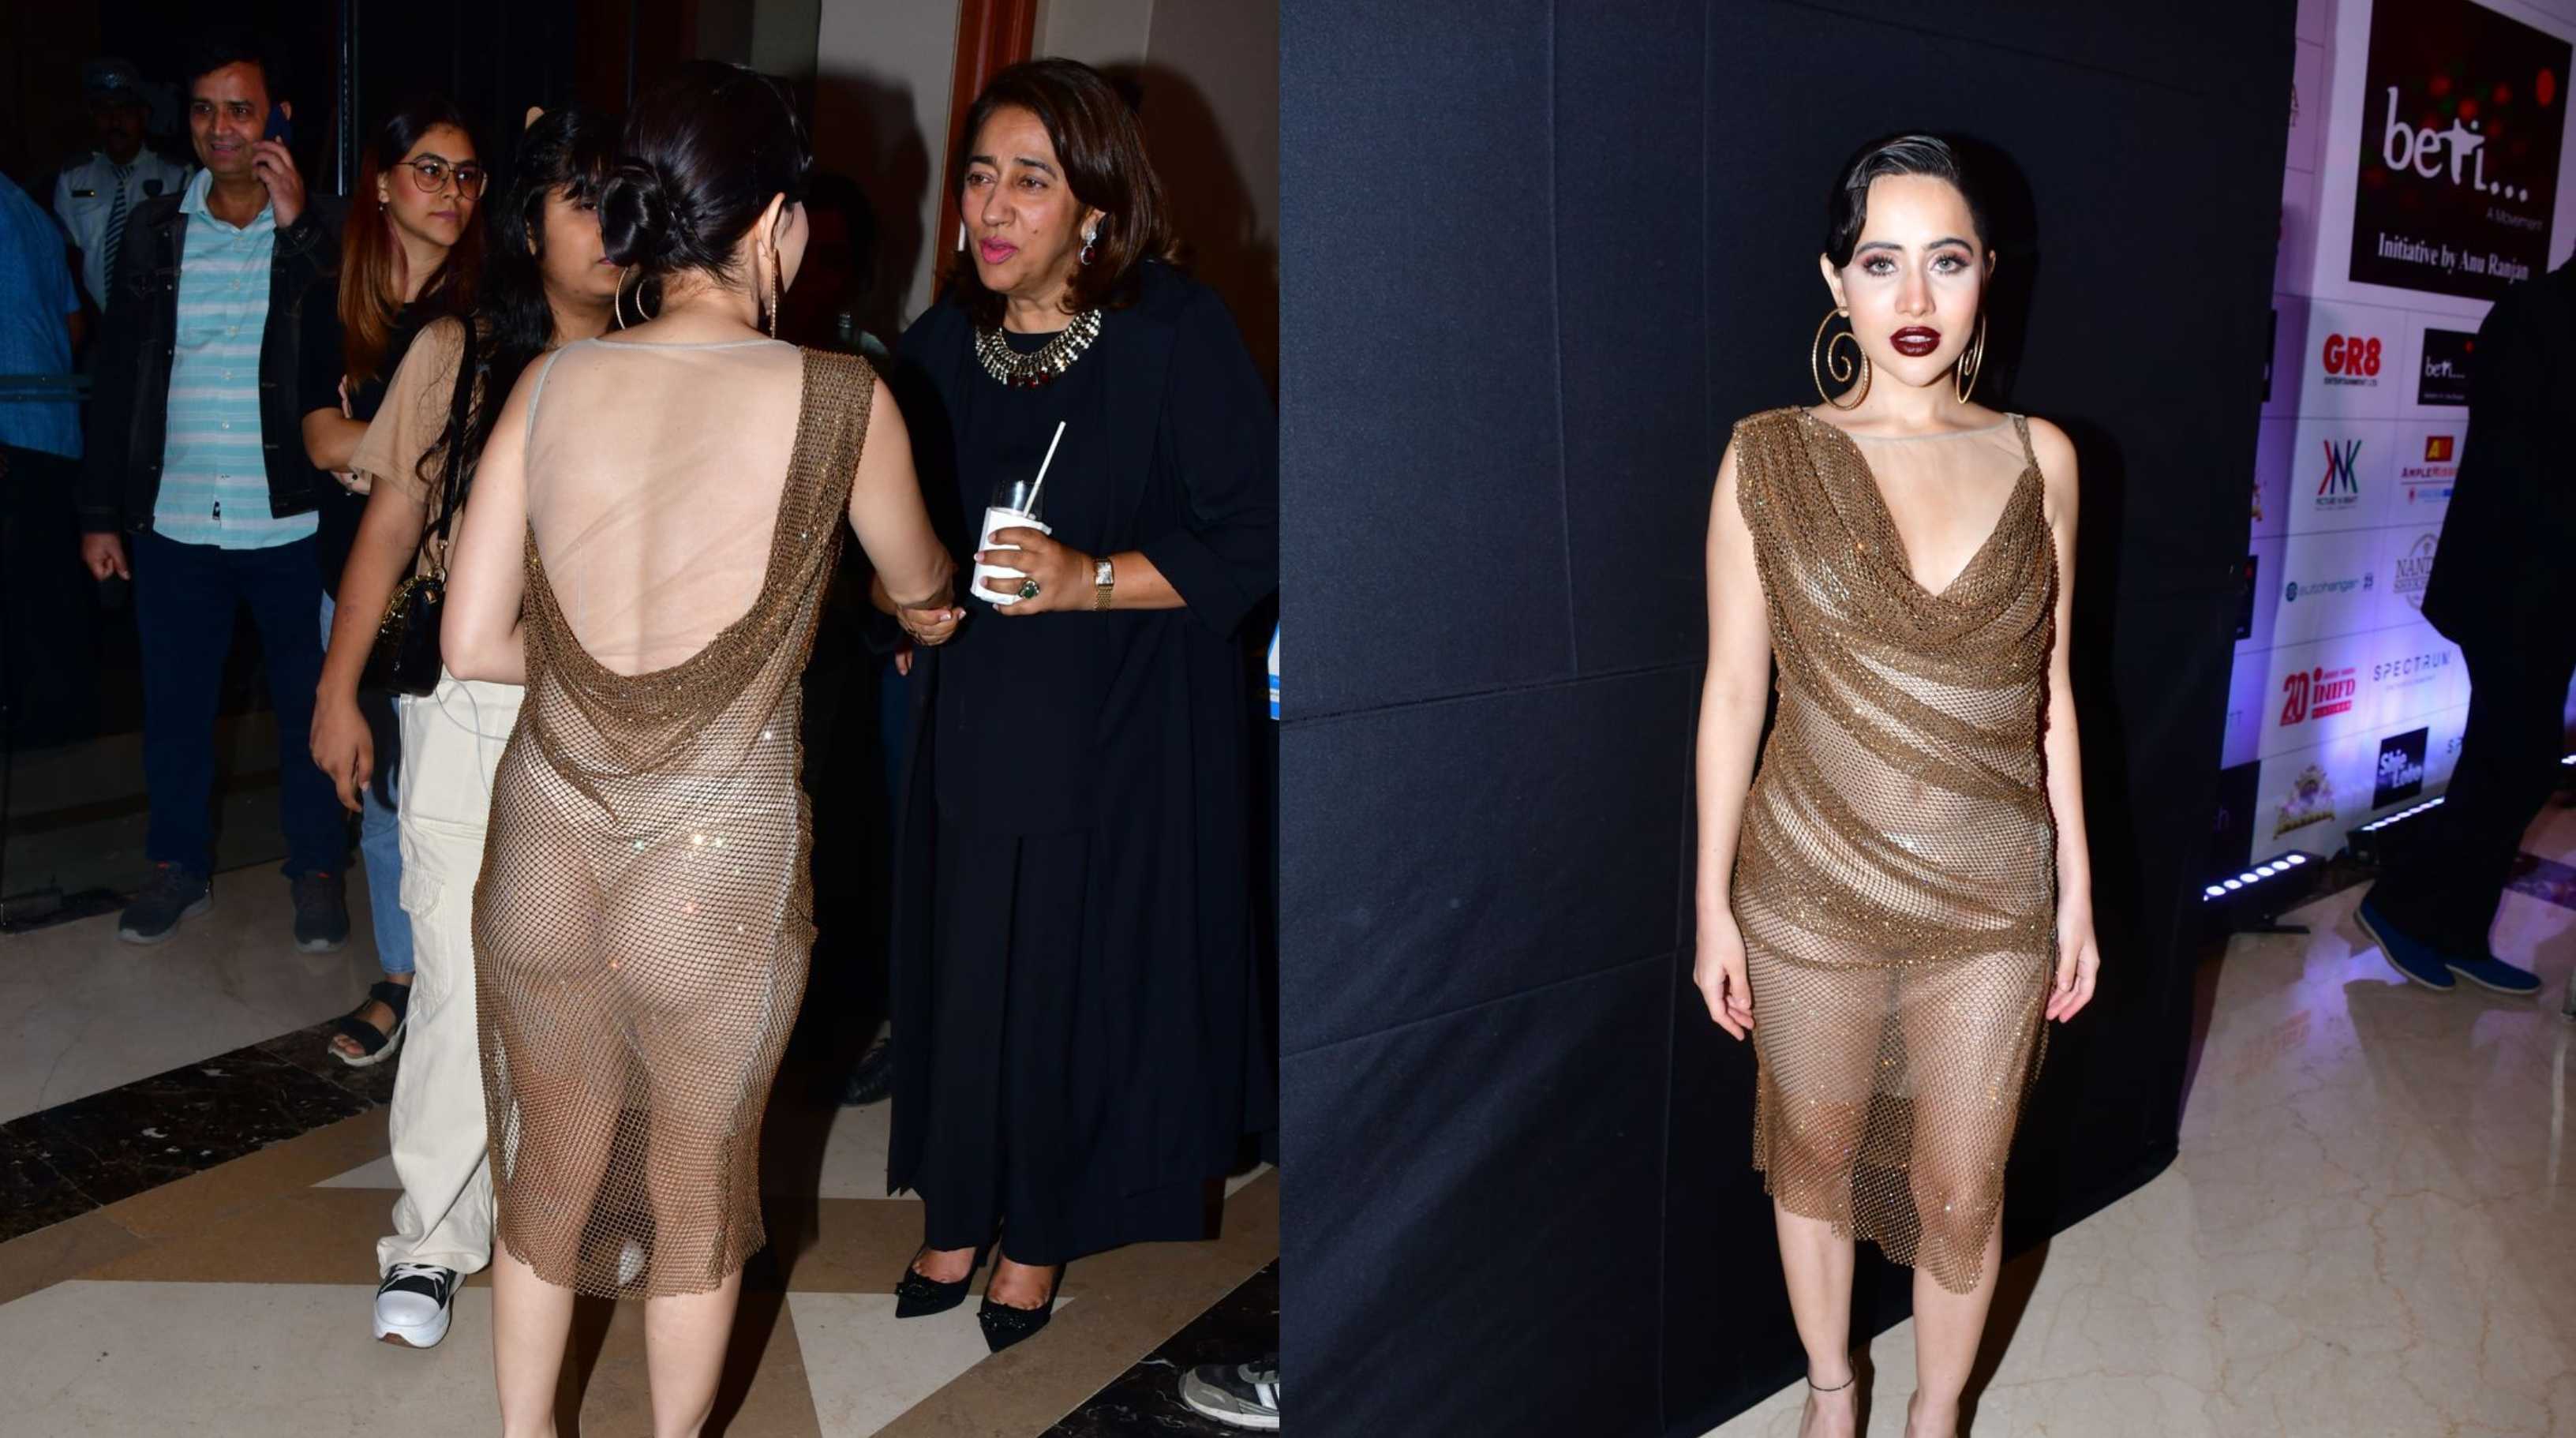 ‘Thoda to pehen lati’: Uorfi Javed gets trolled for literally going backless at an event in a naked dress